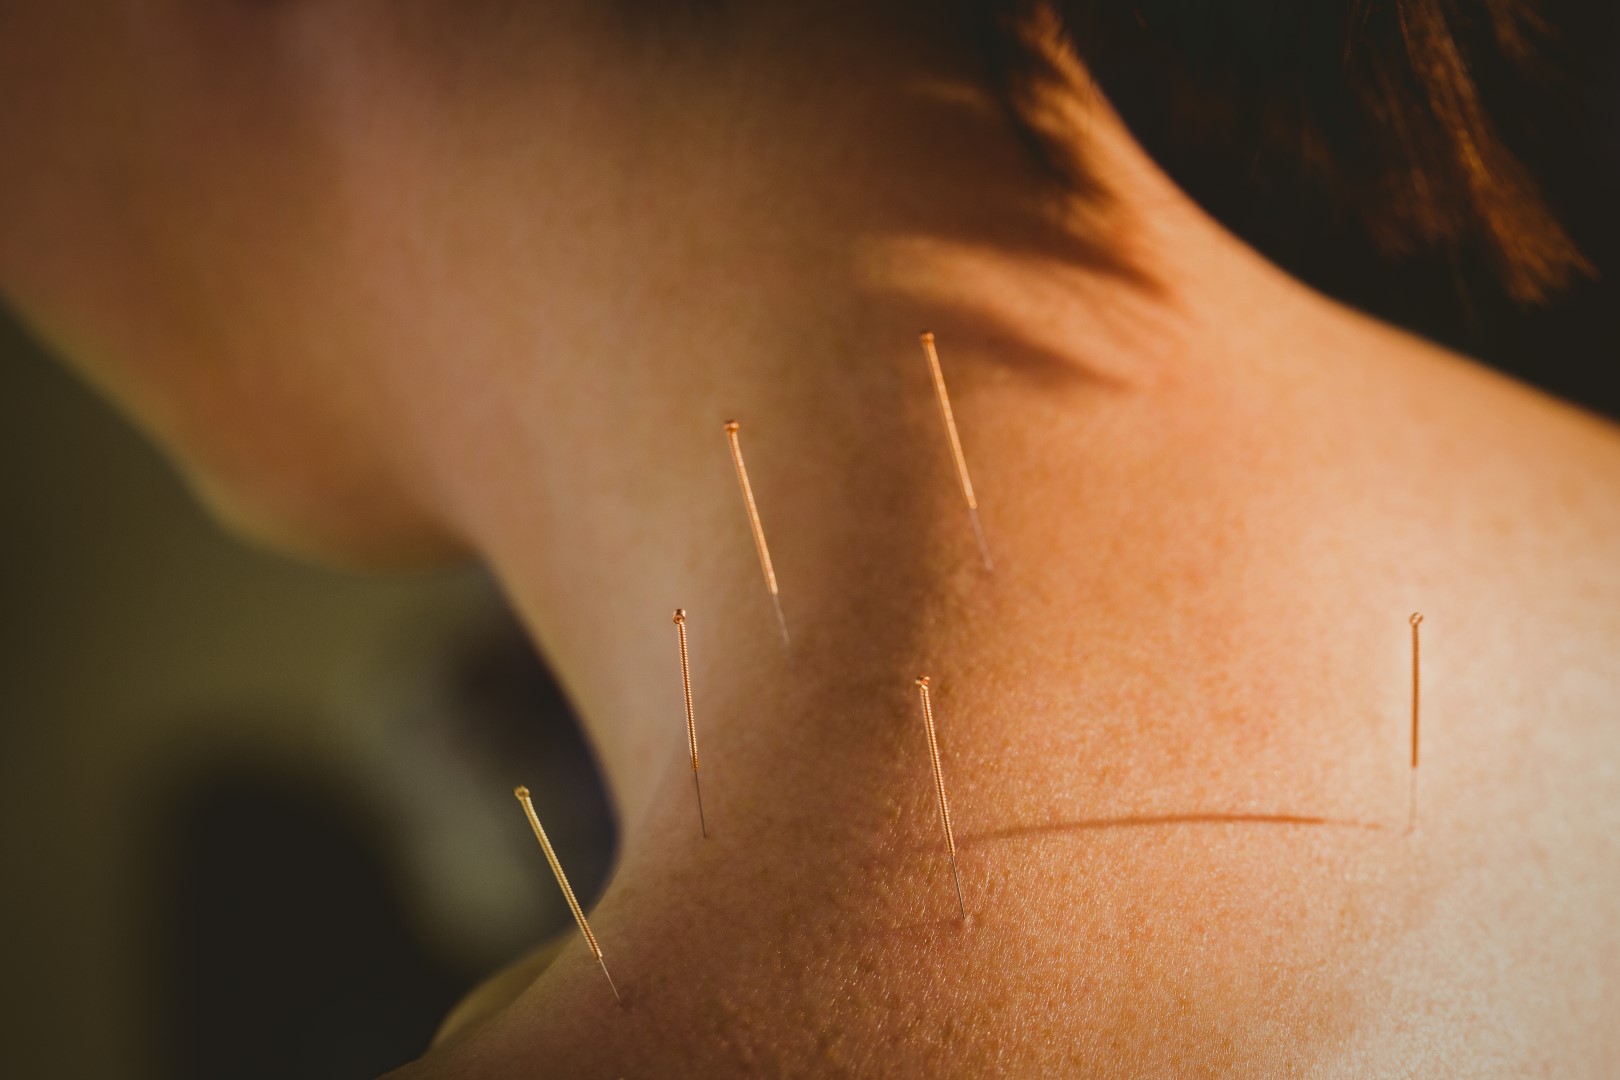 Acupuncture for frozen shoulder: Inserting needles in the acupuncture points to treat frozen shoulder.